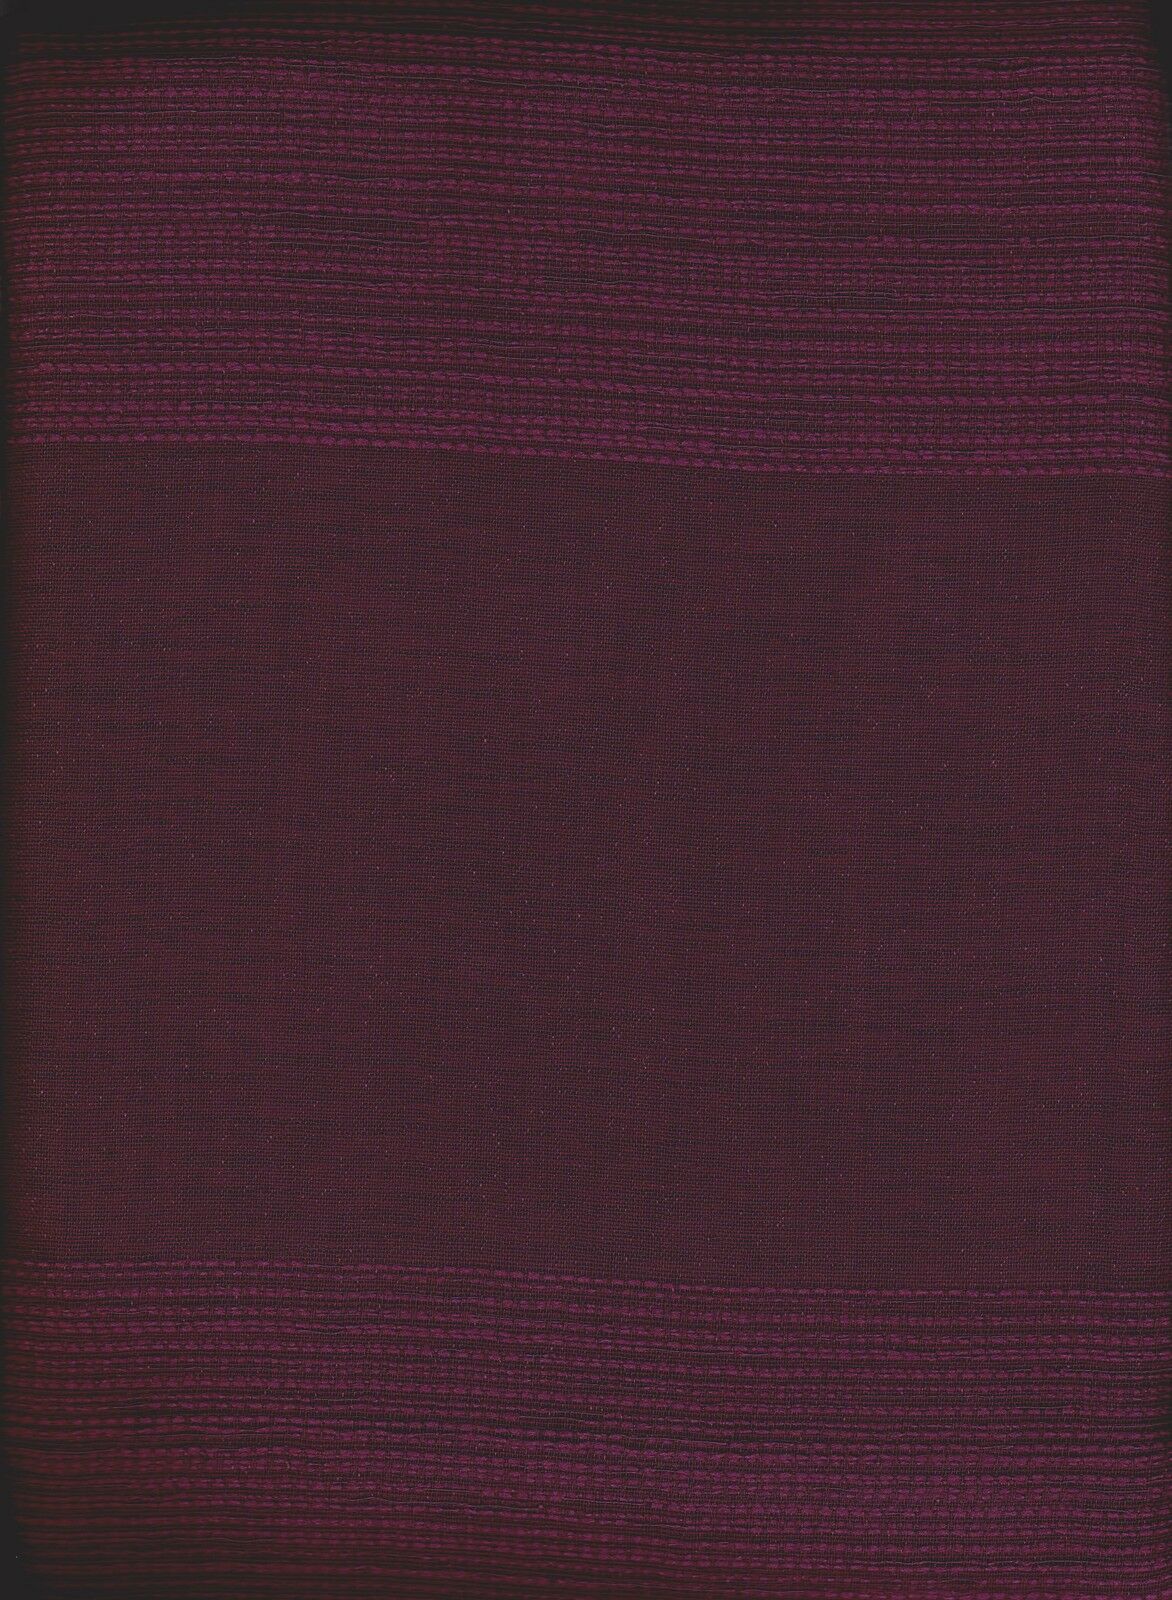 Primary image for New premier collection elegant 2 panels curtain/set "CARLA" - purple